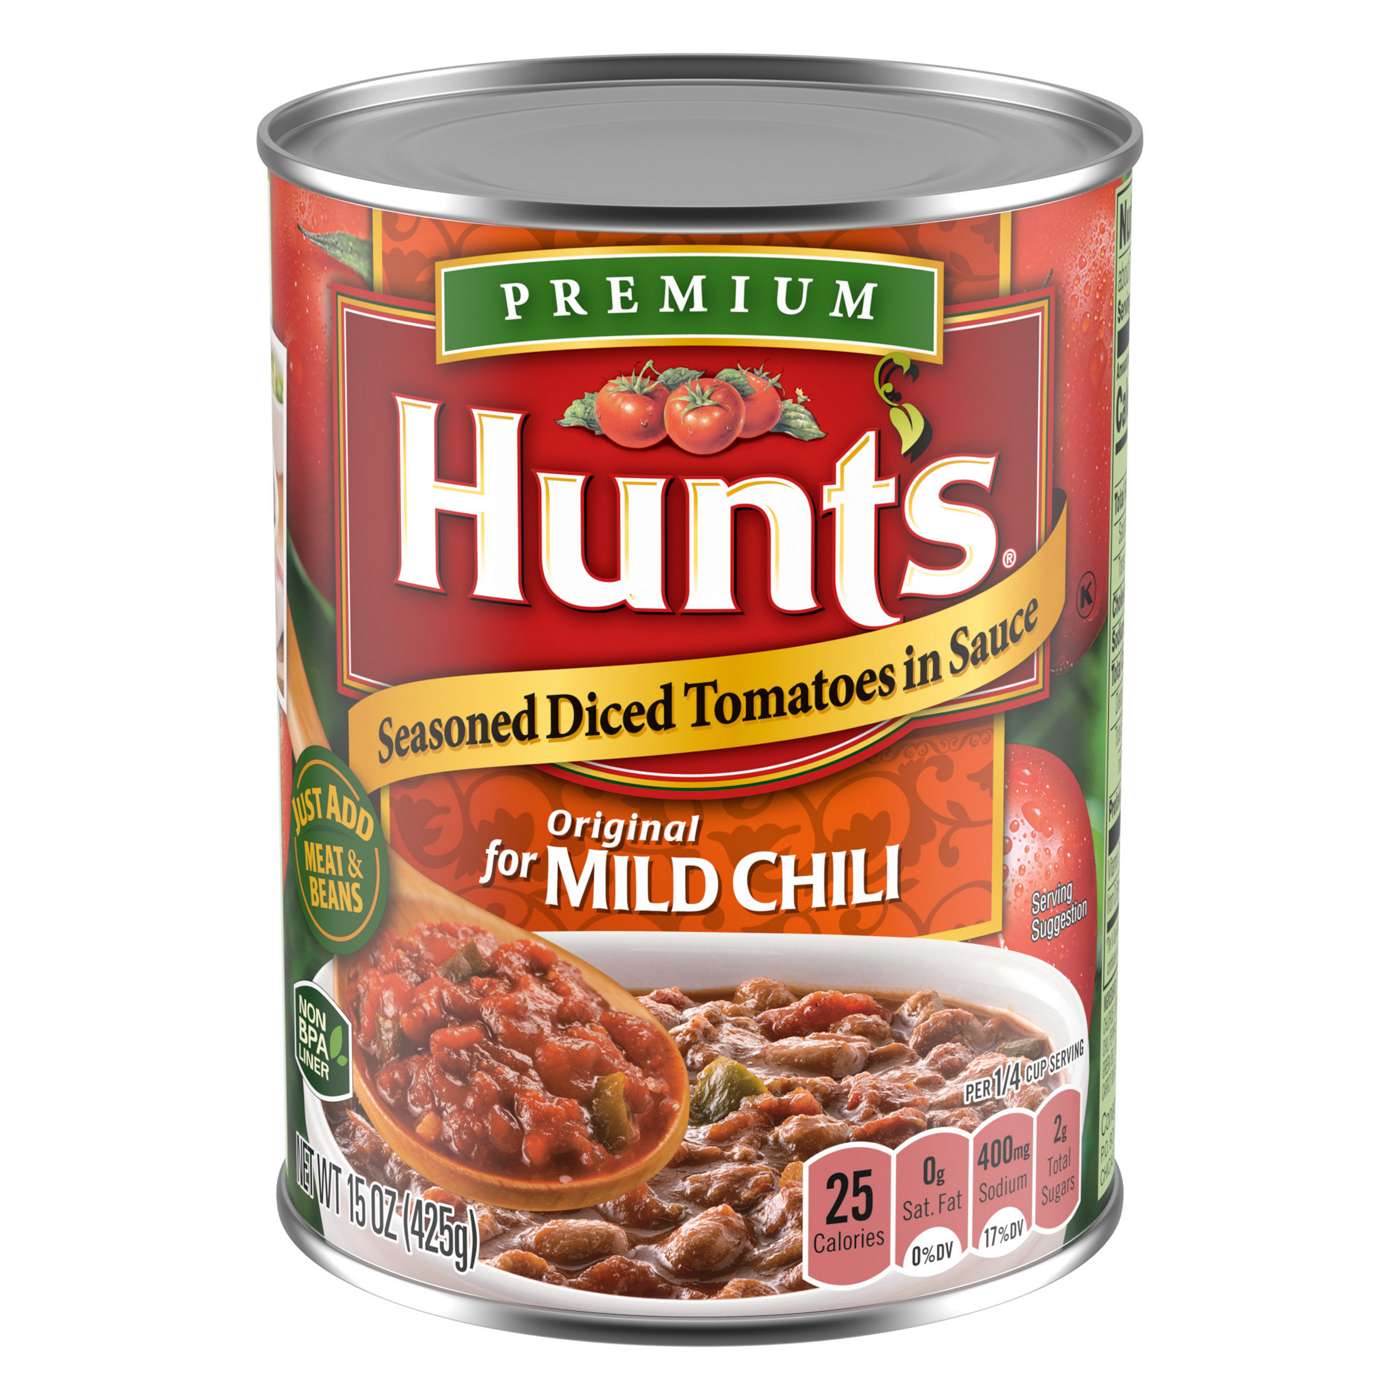 Hunt's Seasoned Diced Tomatoes in Sauce for Mild Chili; image 1 of 4